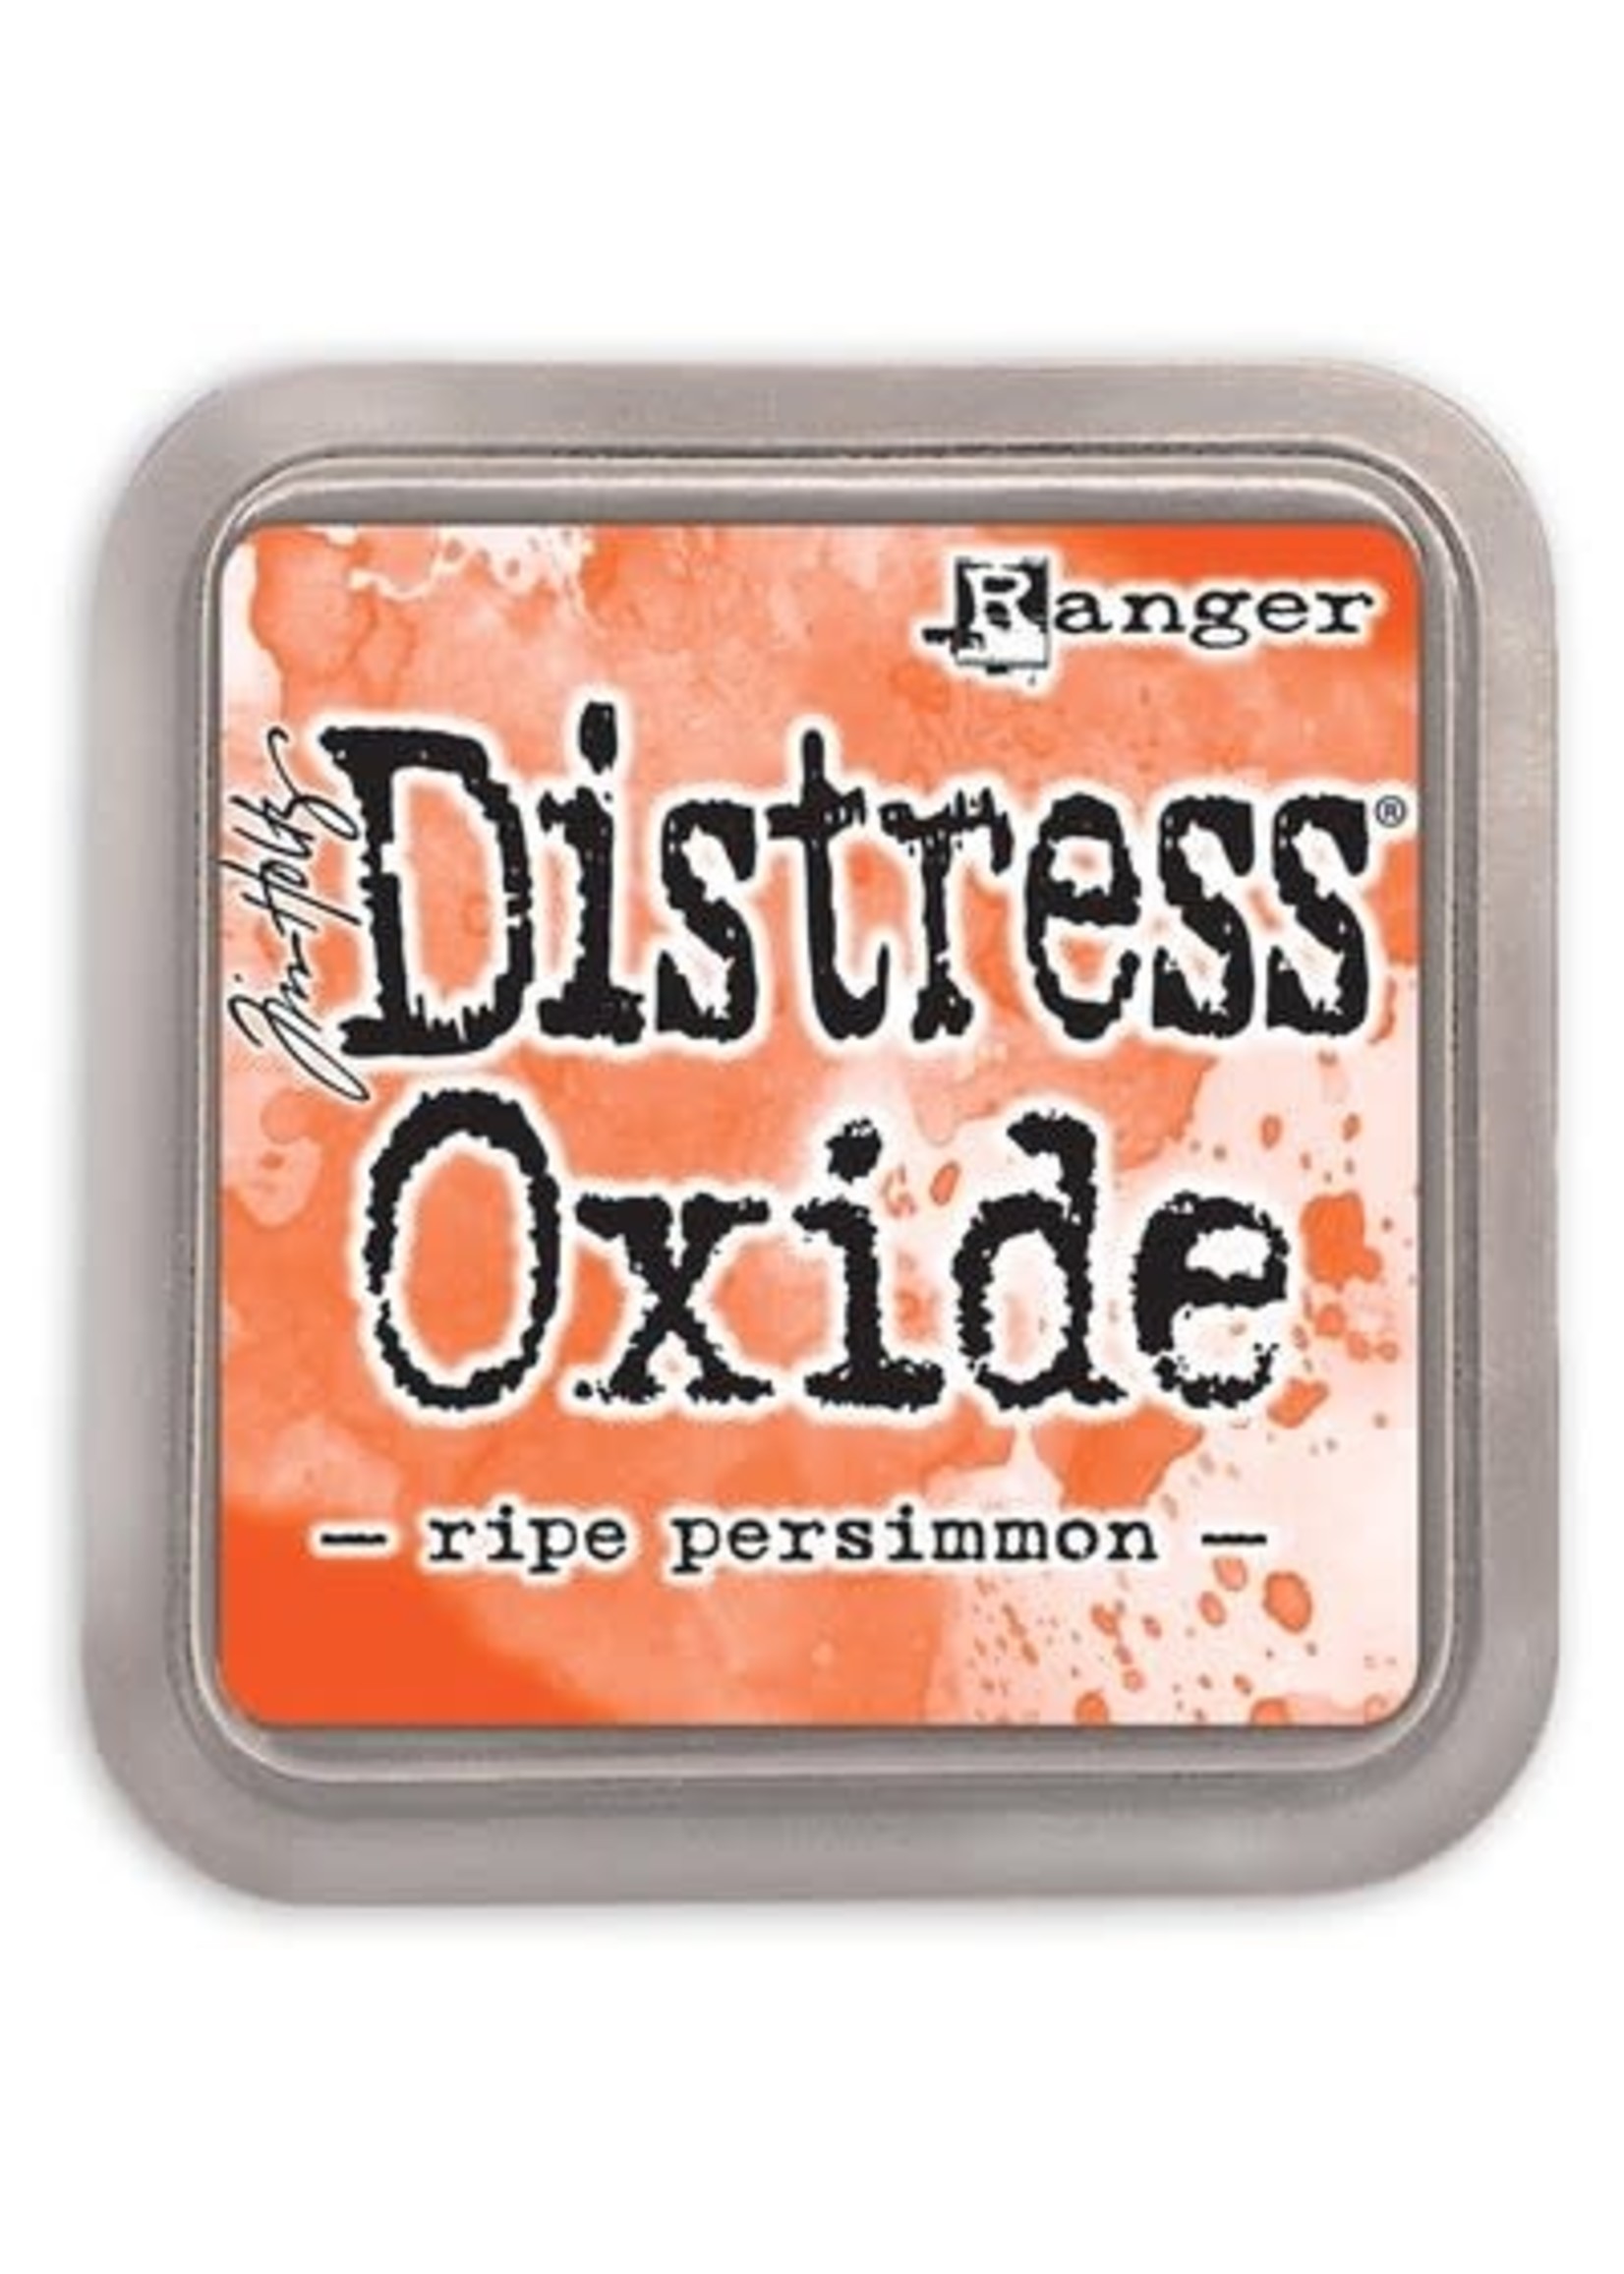 RANGER INDUSTRIES Distress Oxide Ink Pad Ripe Persimmon